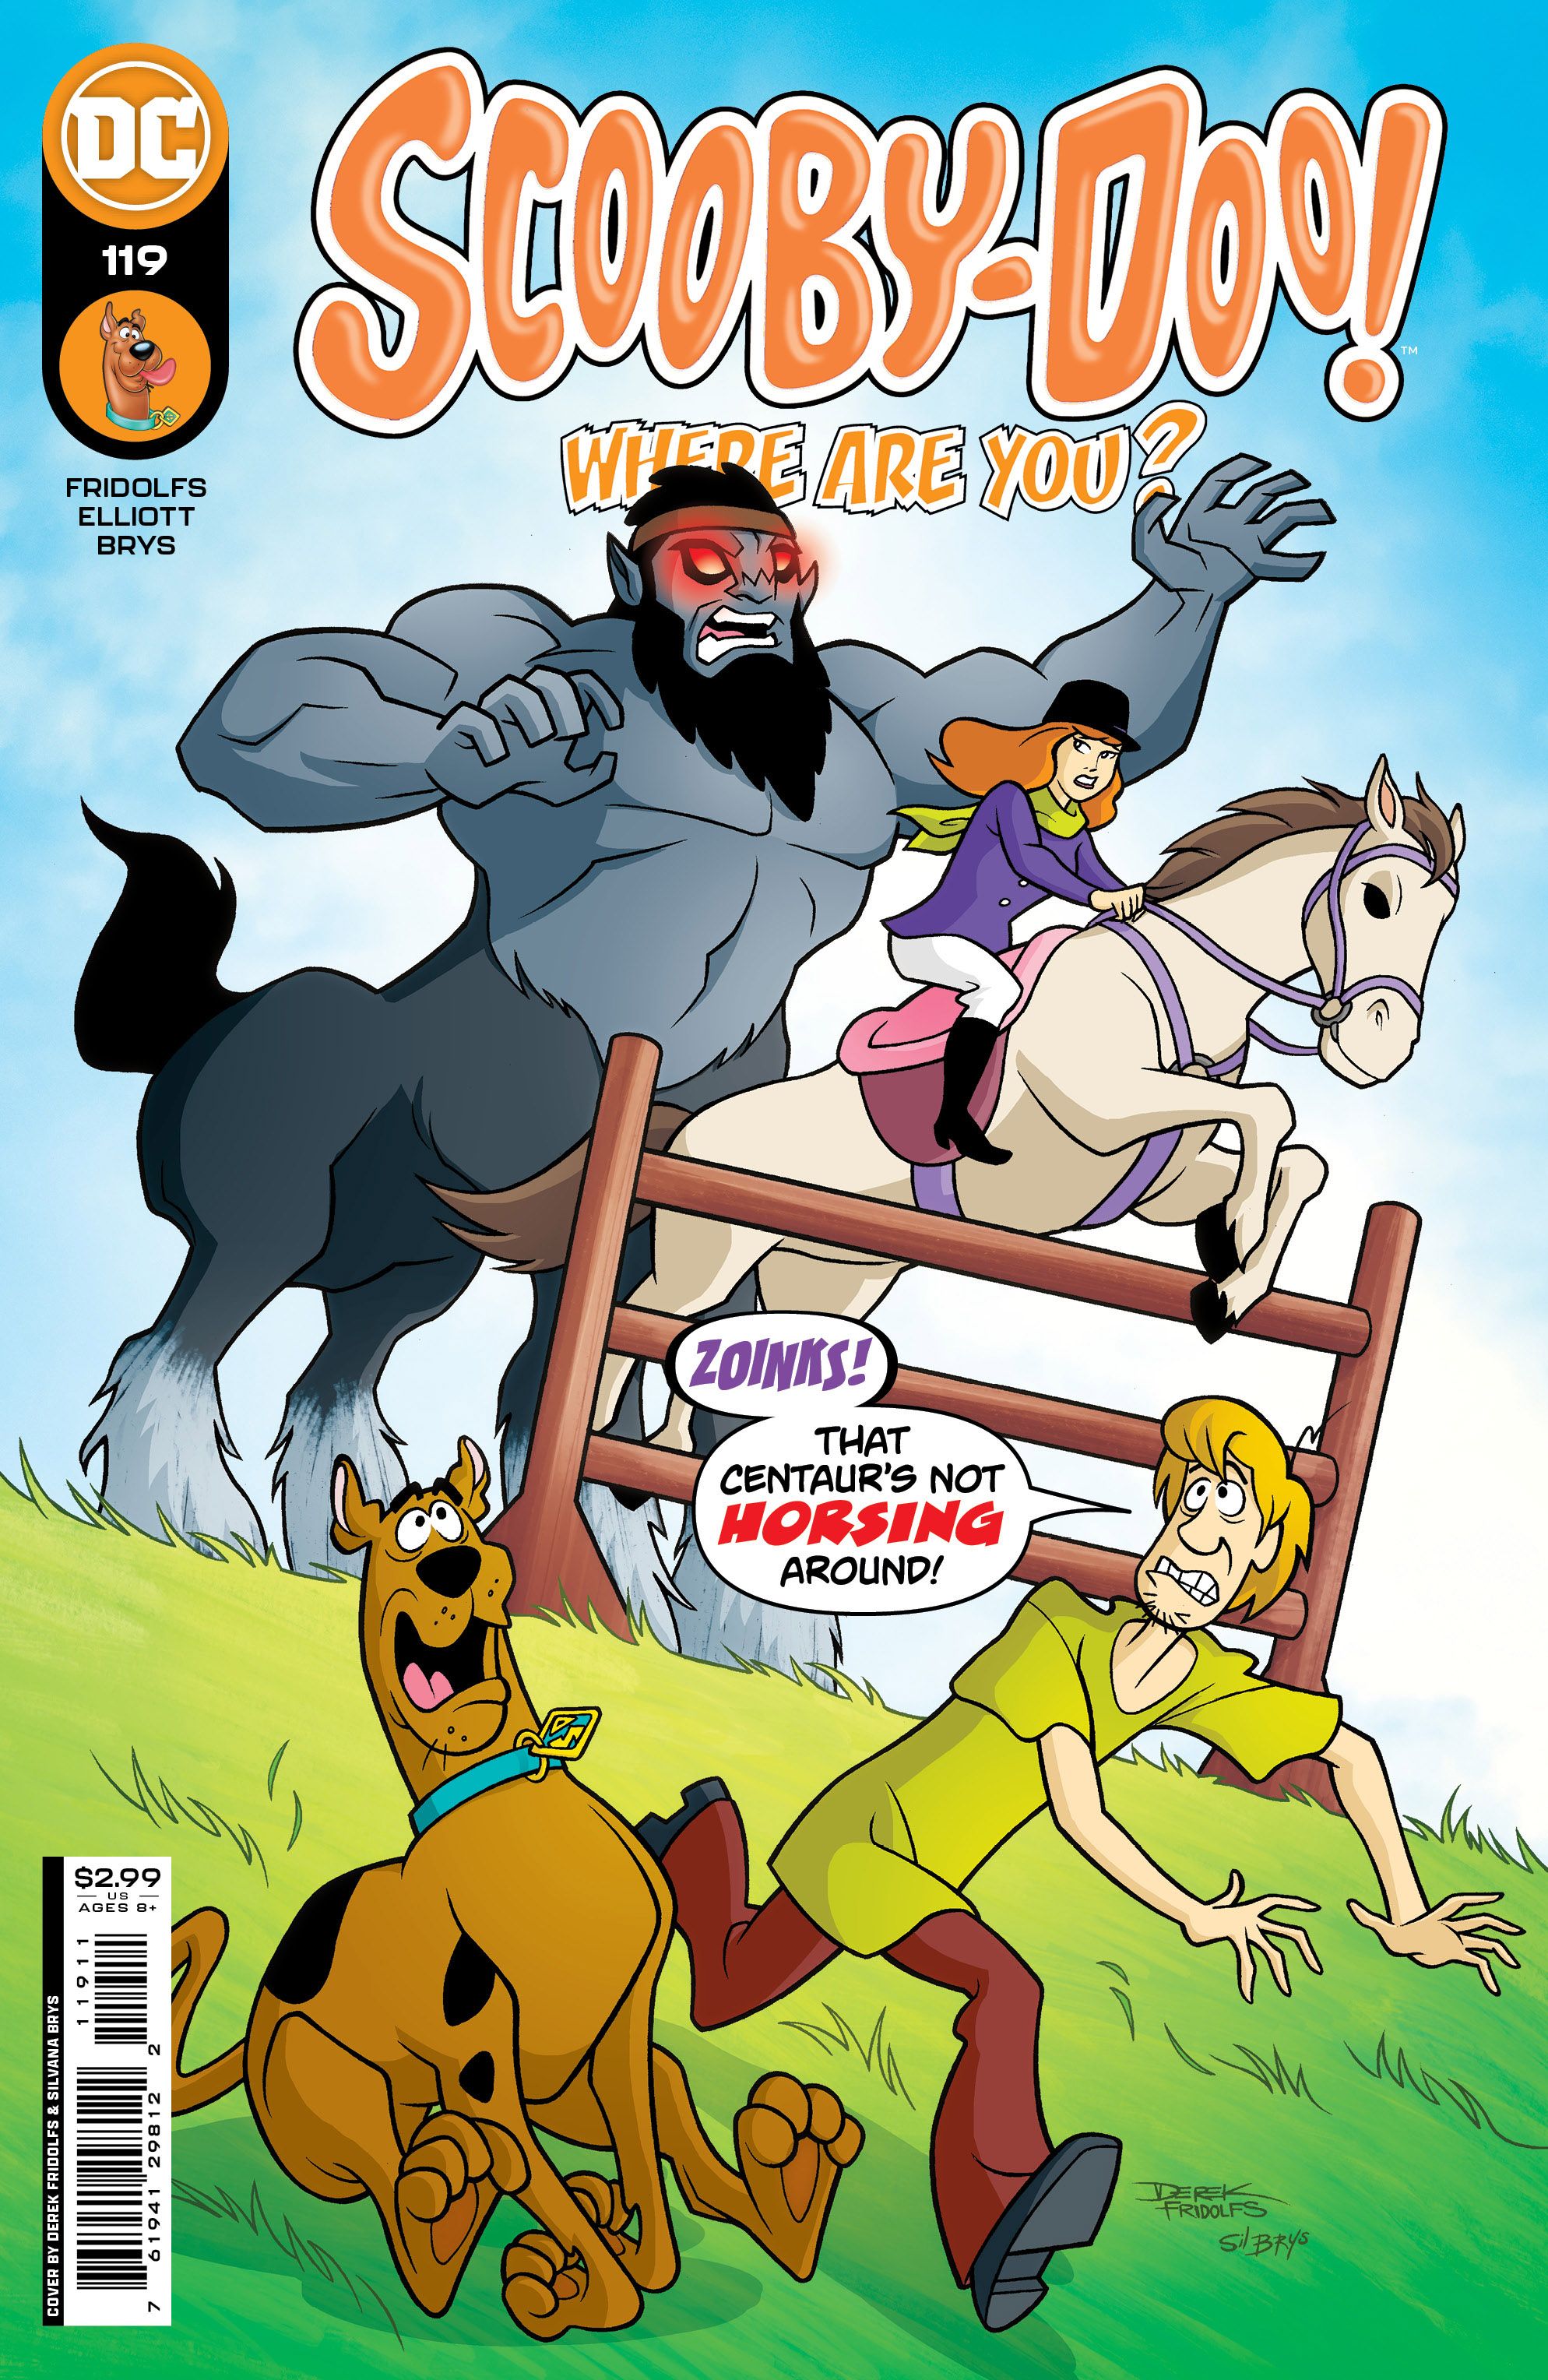 Scooby-Doo, Where Are You? #119 Comic